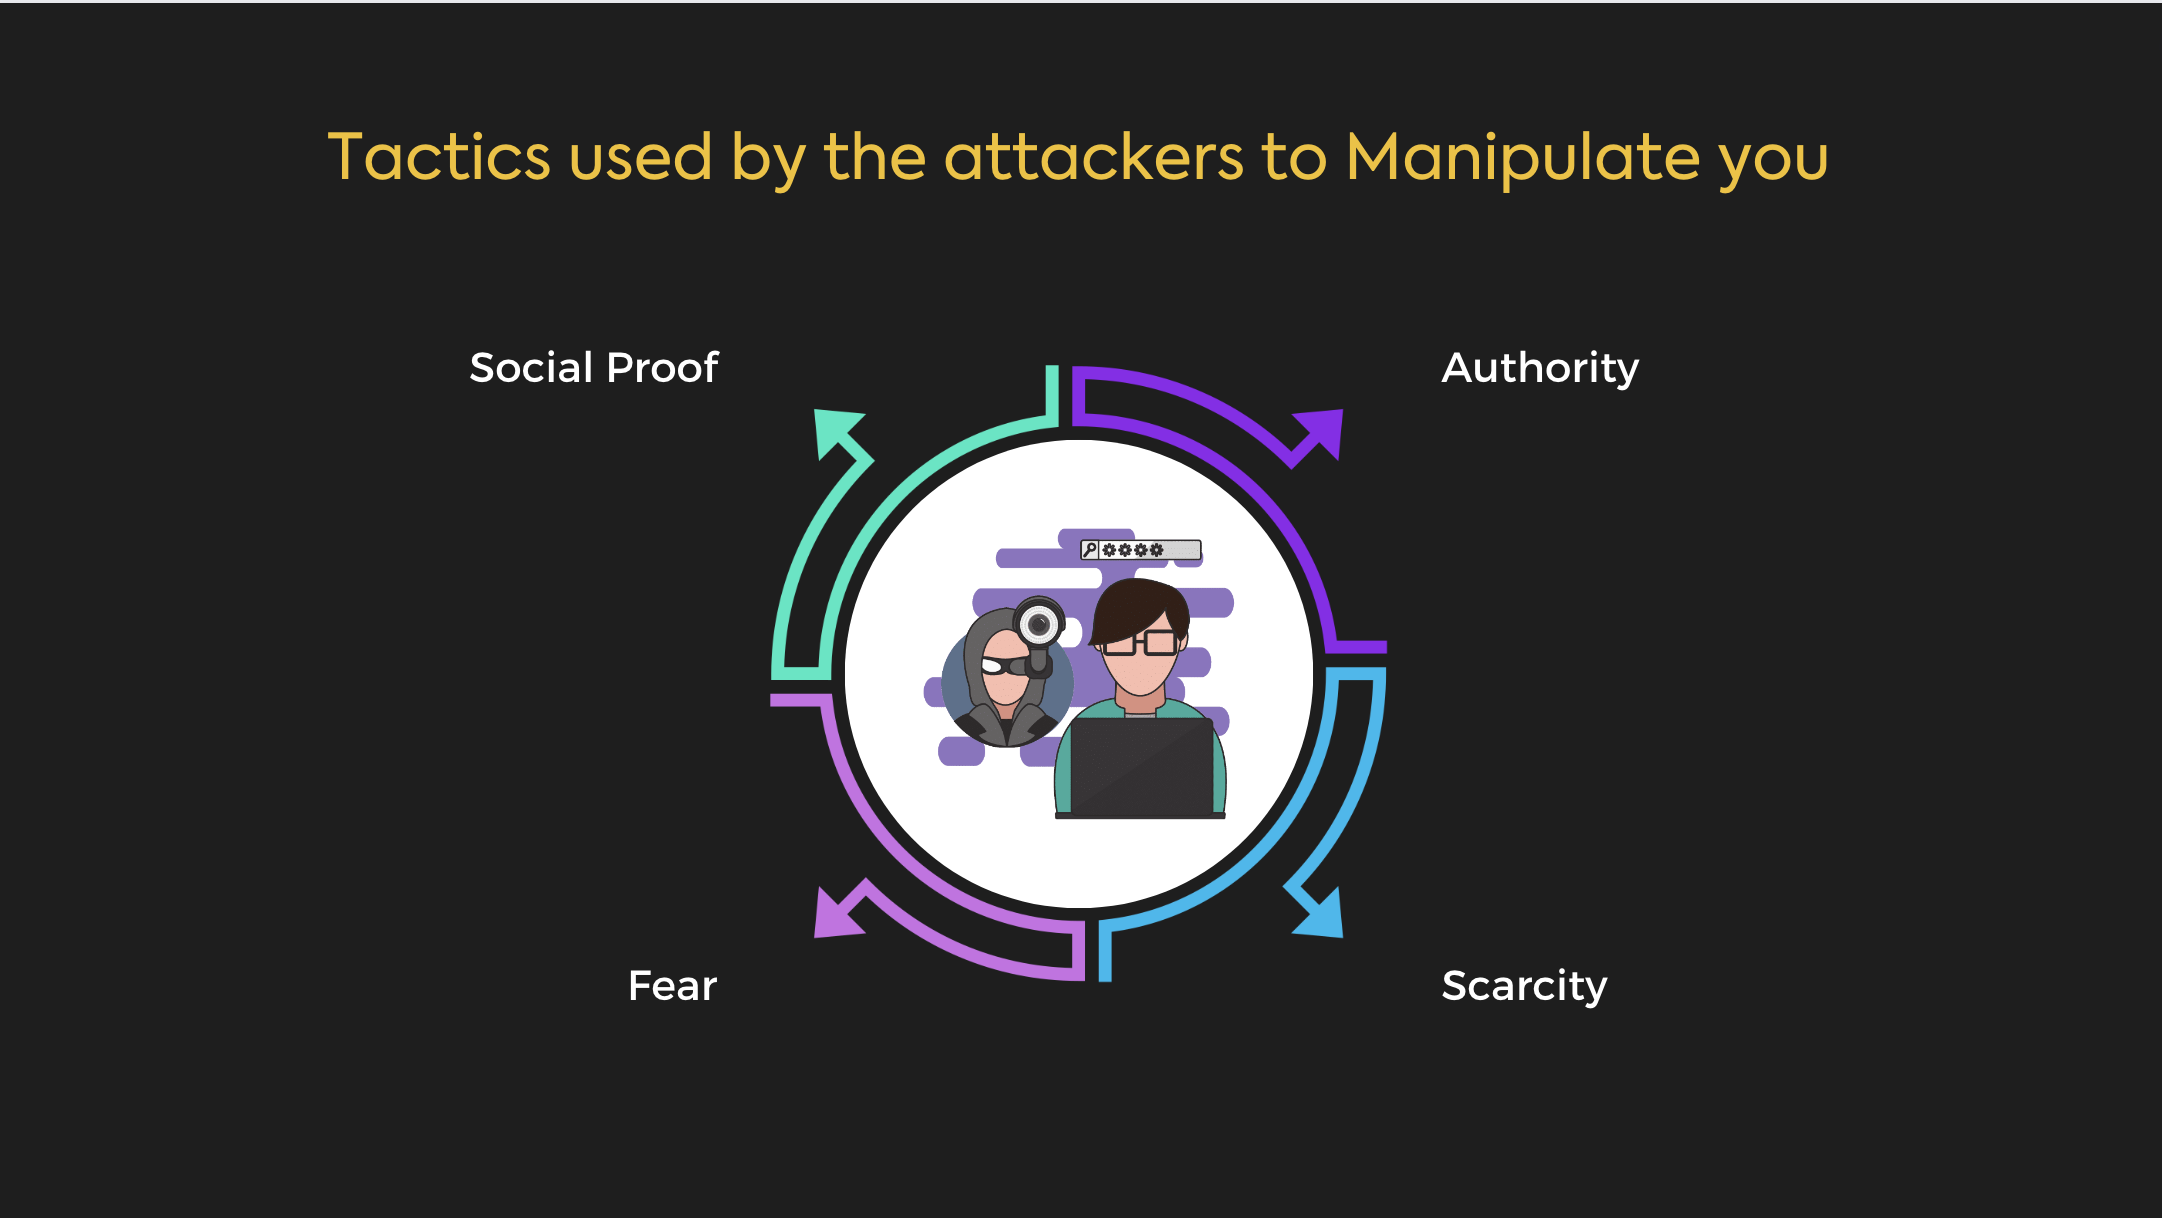 Tactics used by attackers to manipulate